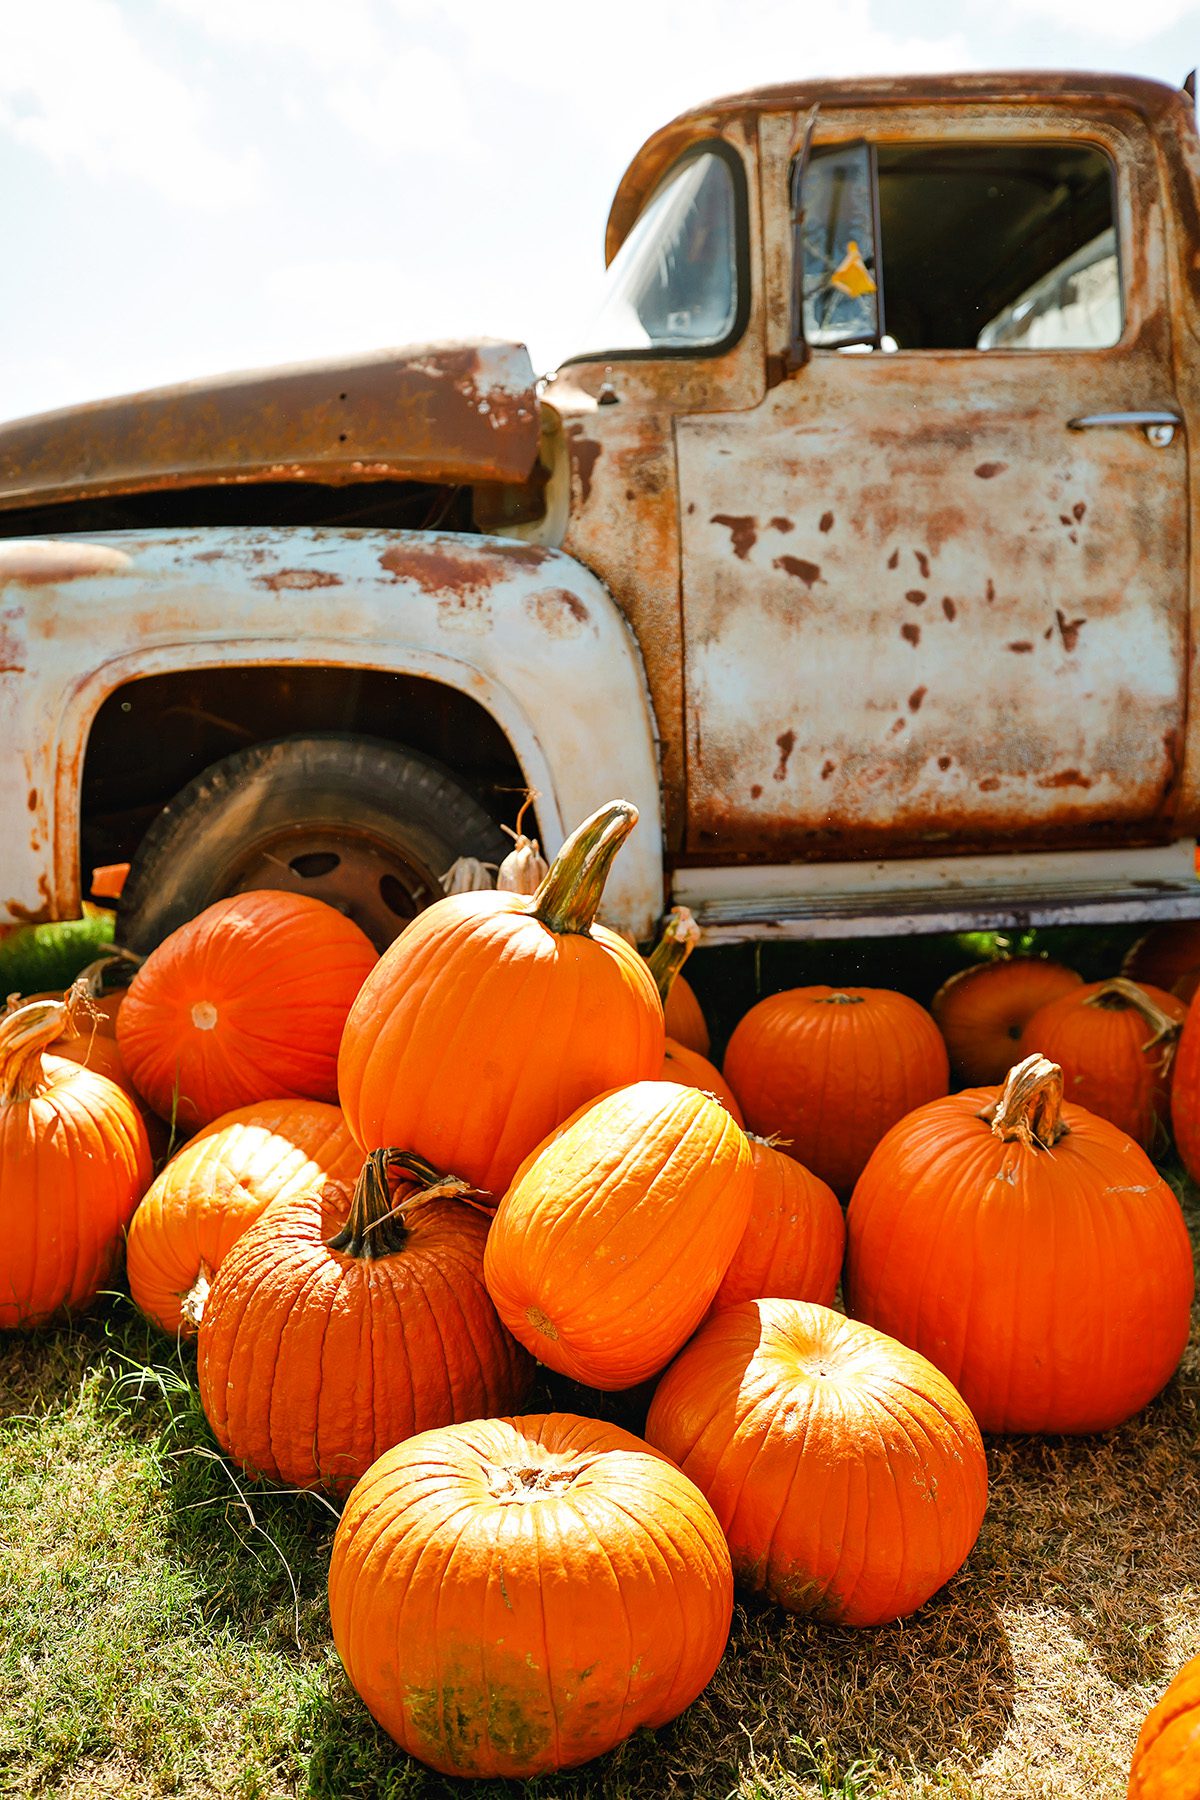 Sweet Berry Farms Marble Falls, Texas pumpkin patch with truck